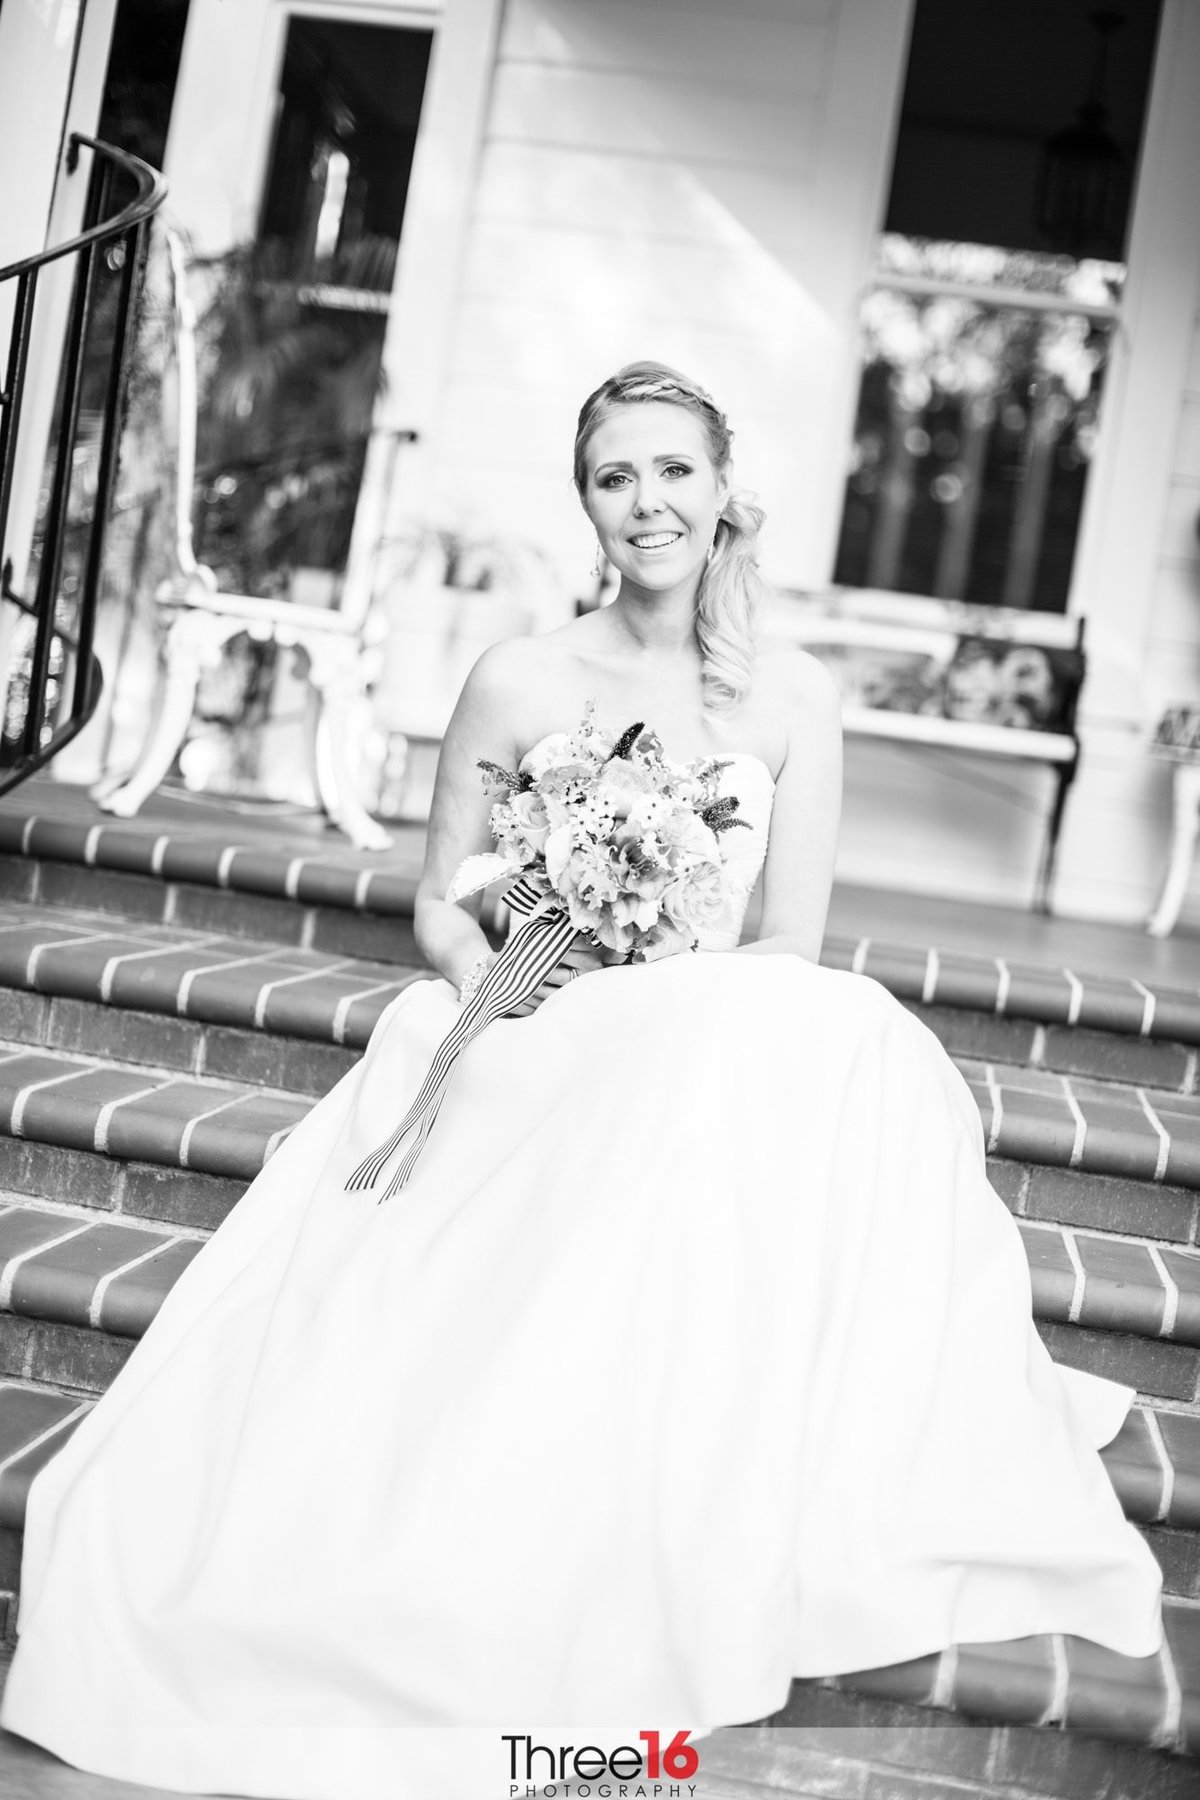 Black & White photo of Bride posing for the camera